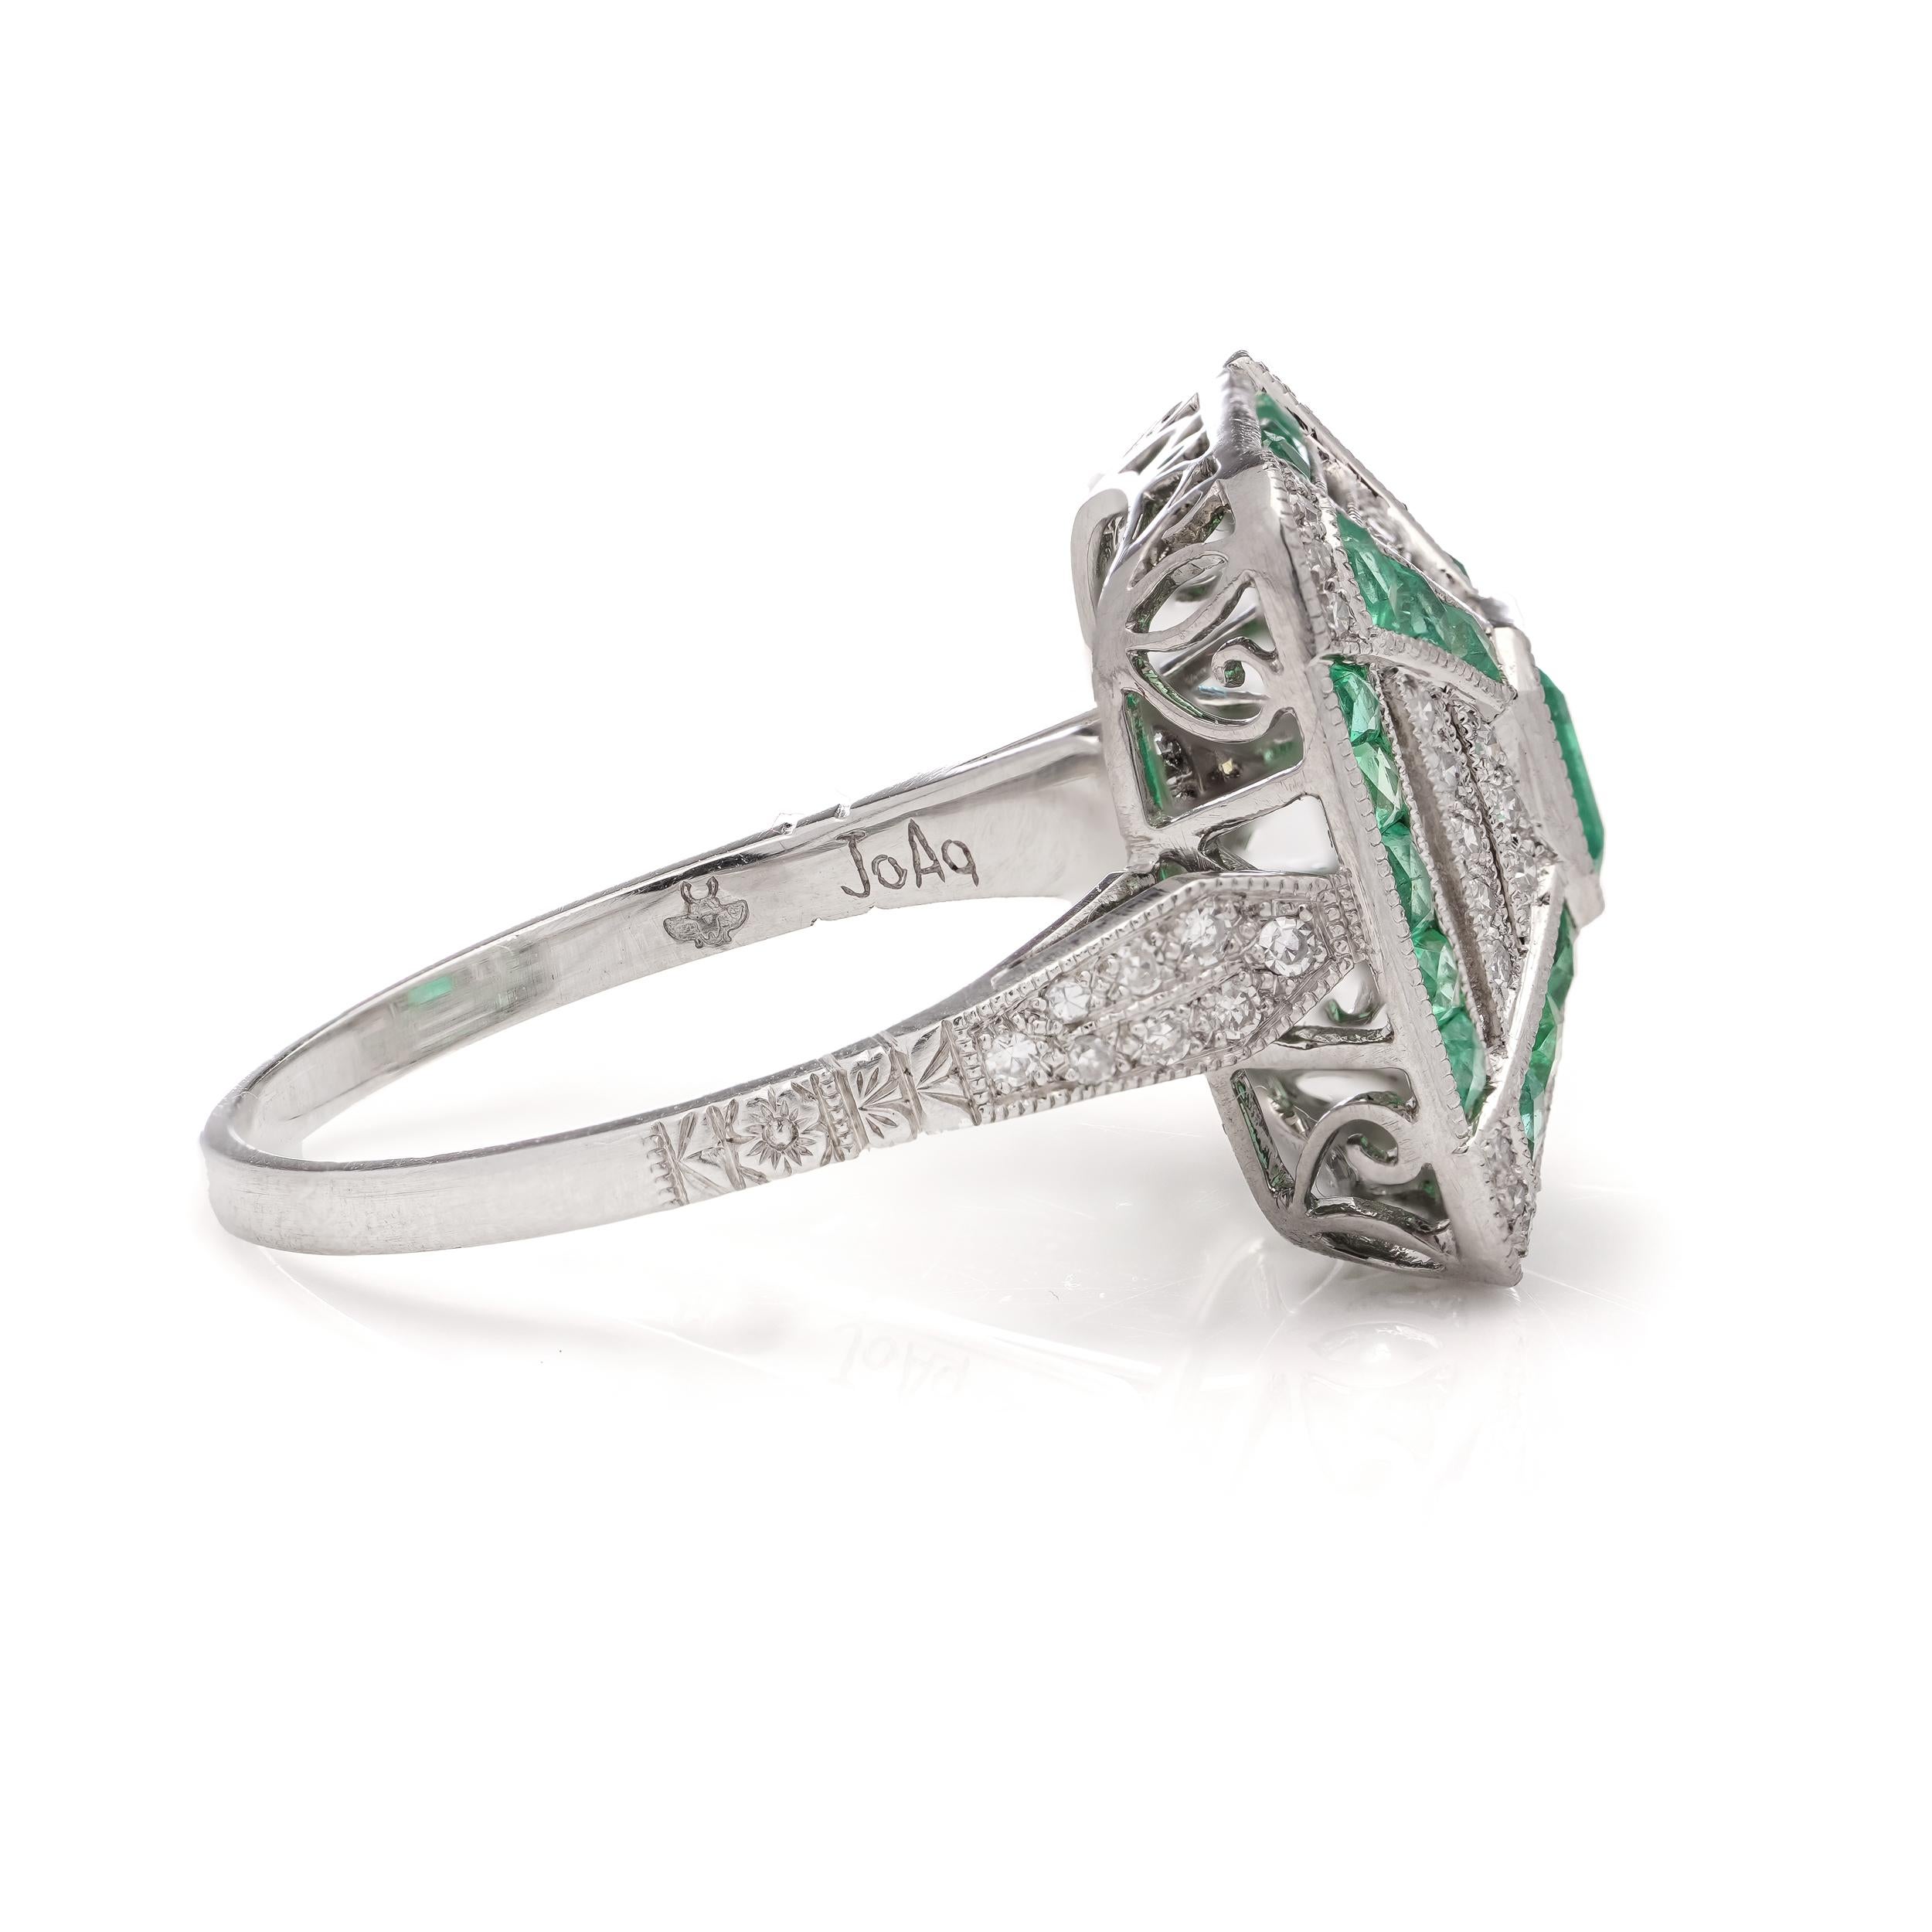 Platinum Art Deco-inspired 0.42 carats of Emerald fashion ring In Excellent Condition For Sale In Braintree, GB